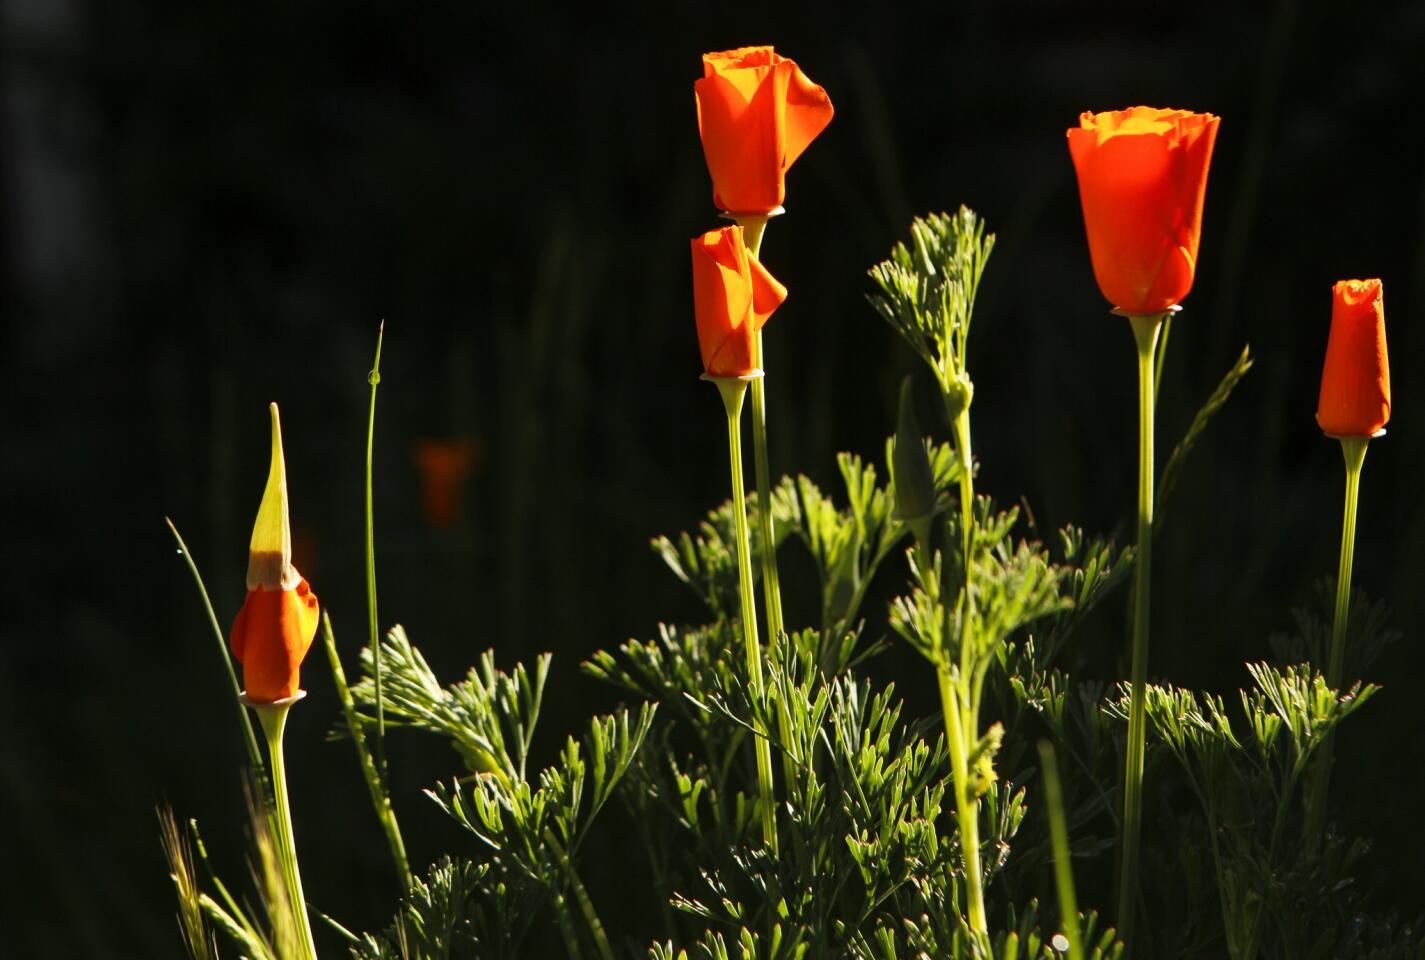 California poppies bloom in the spring.